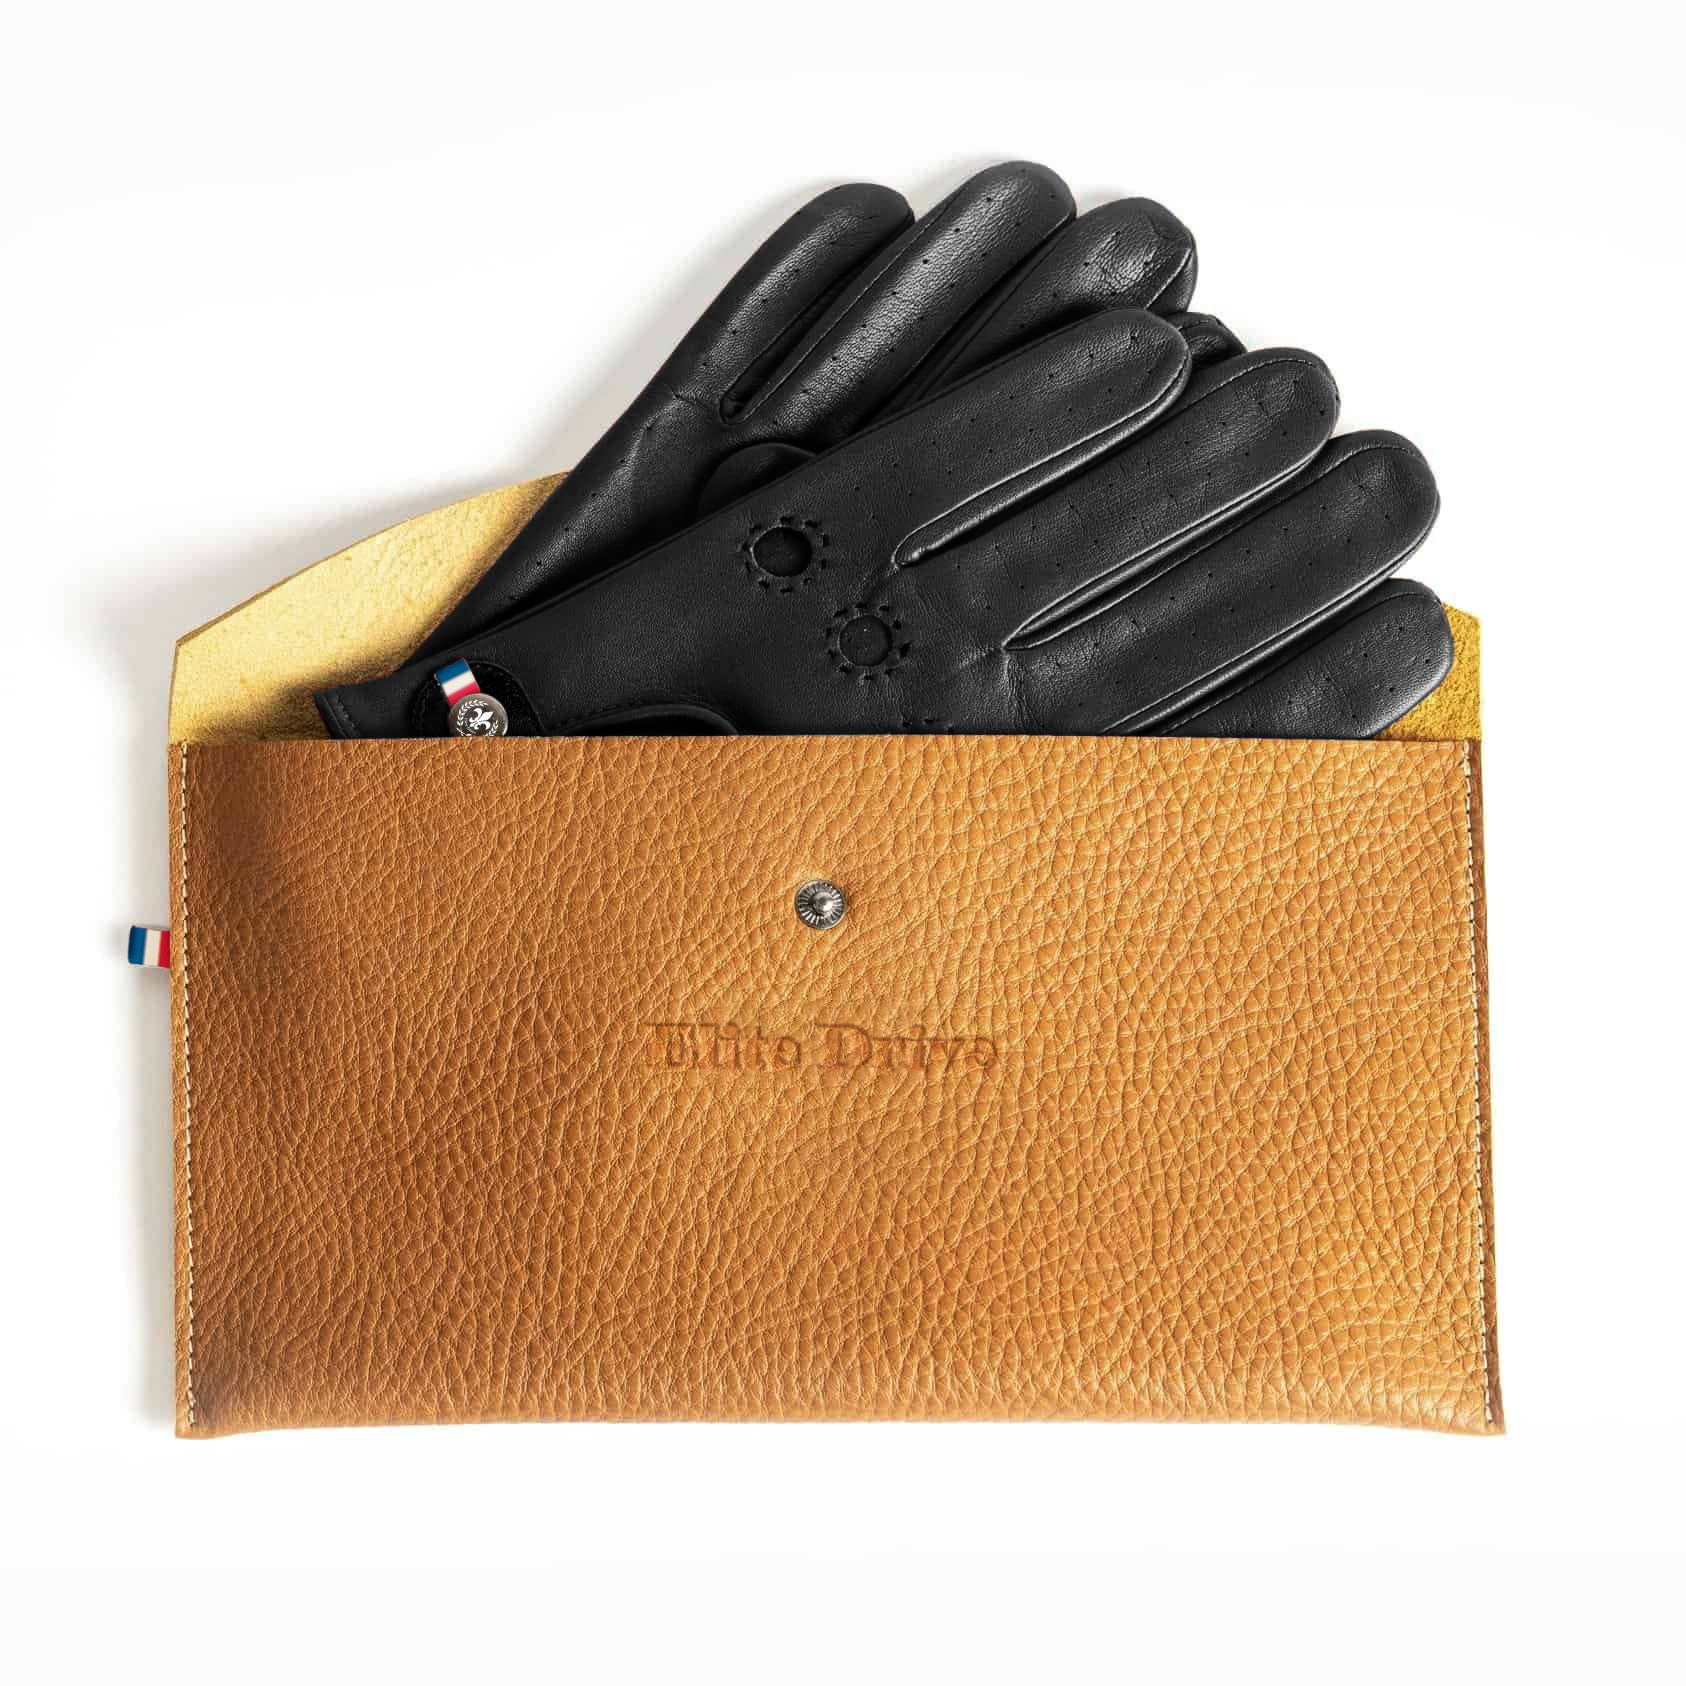 The Ultimate Guide on Where to Buy Driving Gloves